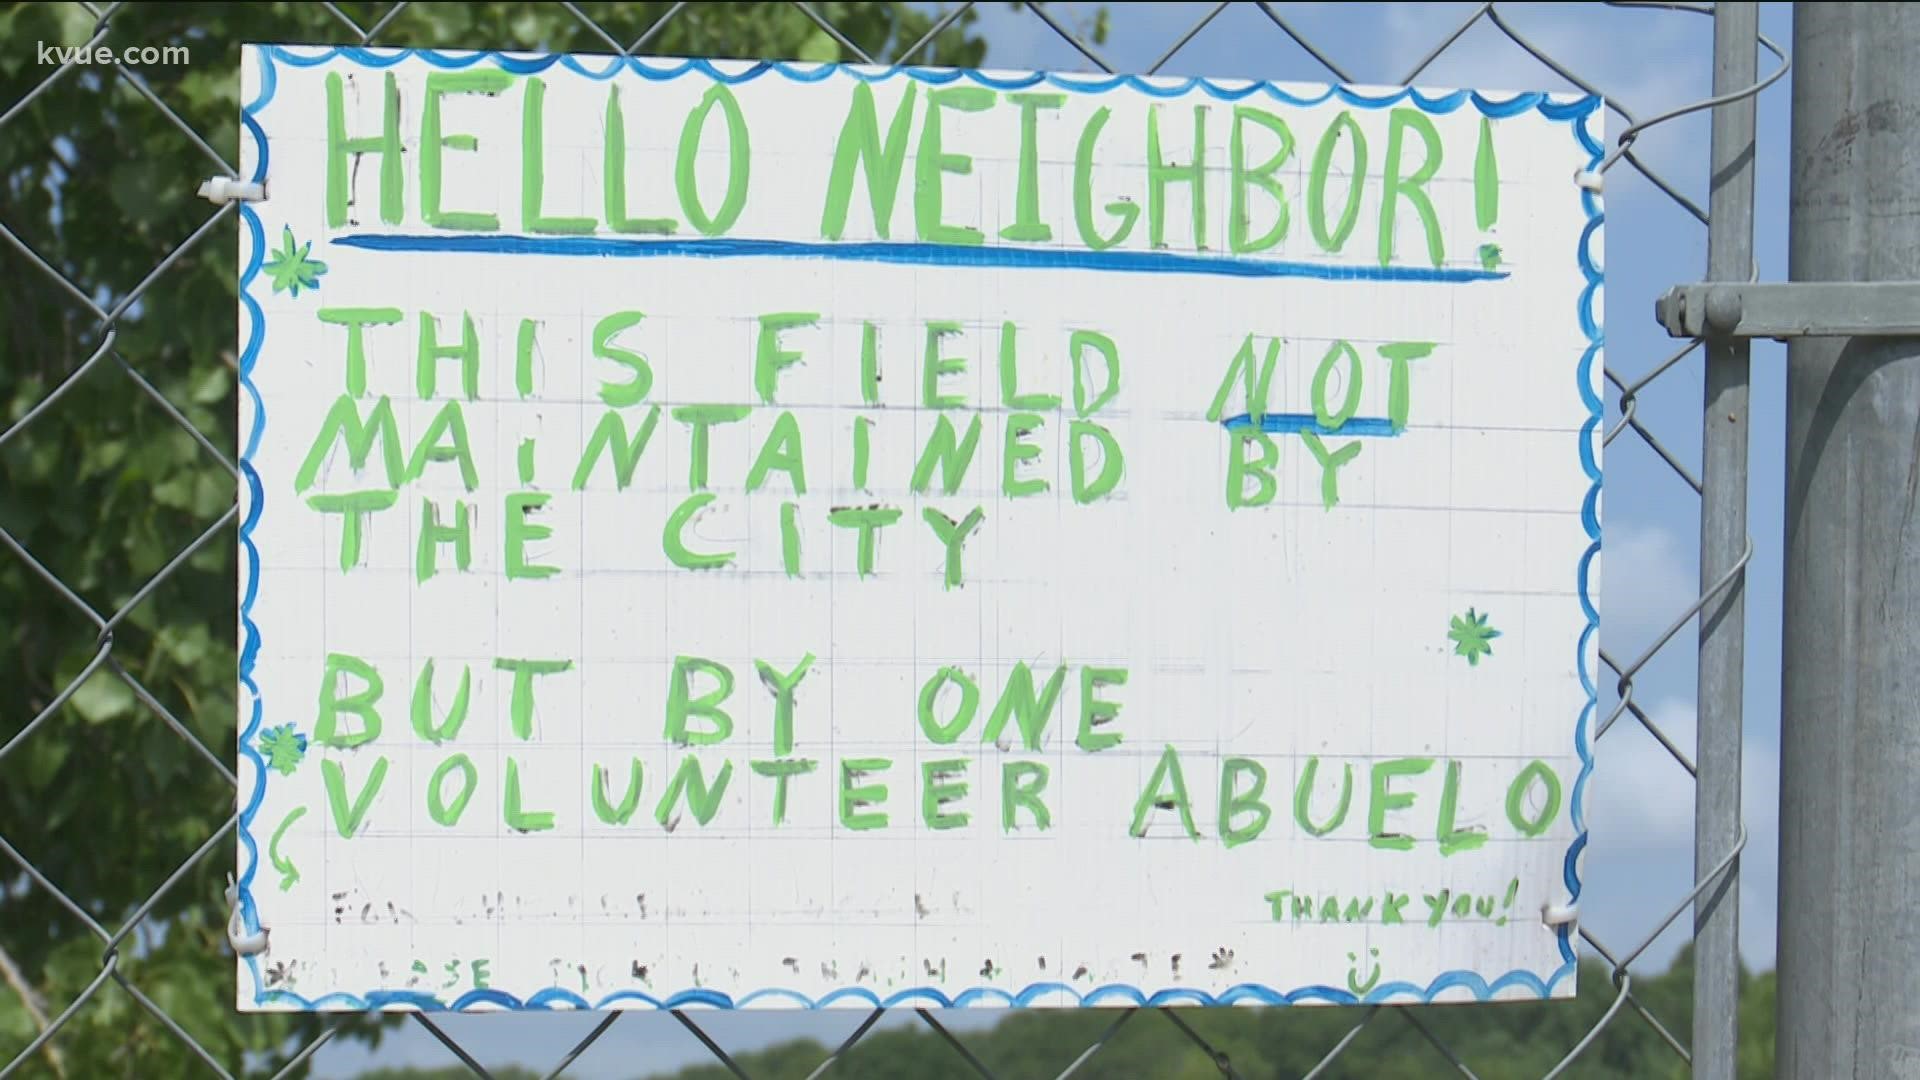 A 70-year-old East Austin man is stepping in where City crews haven't.